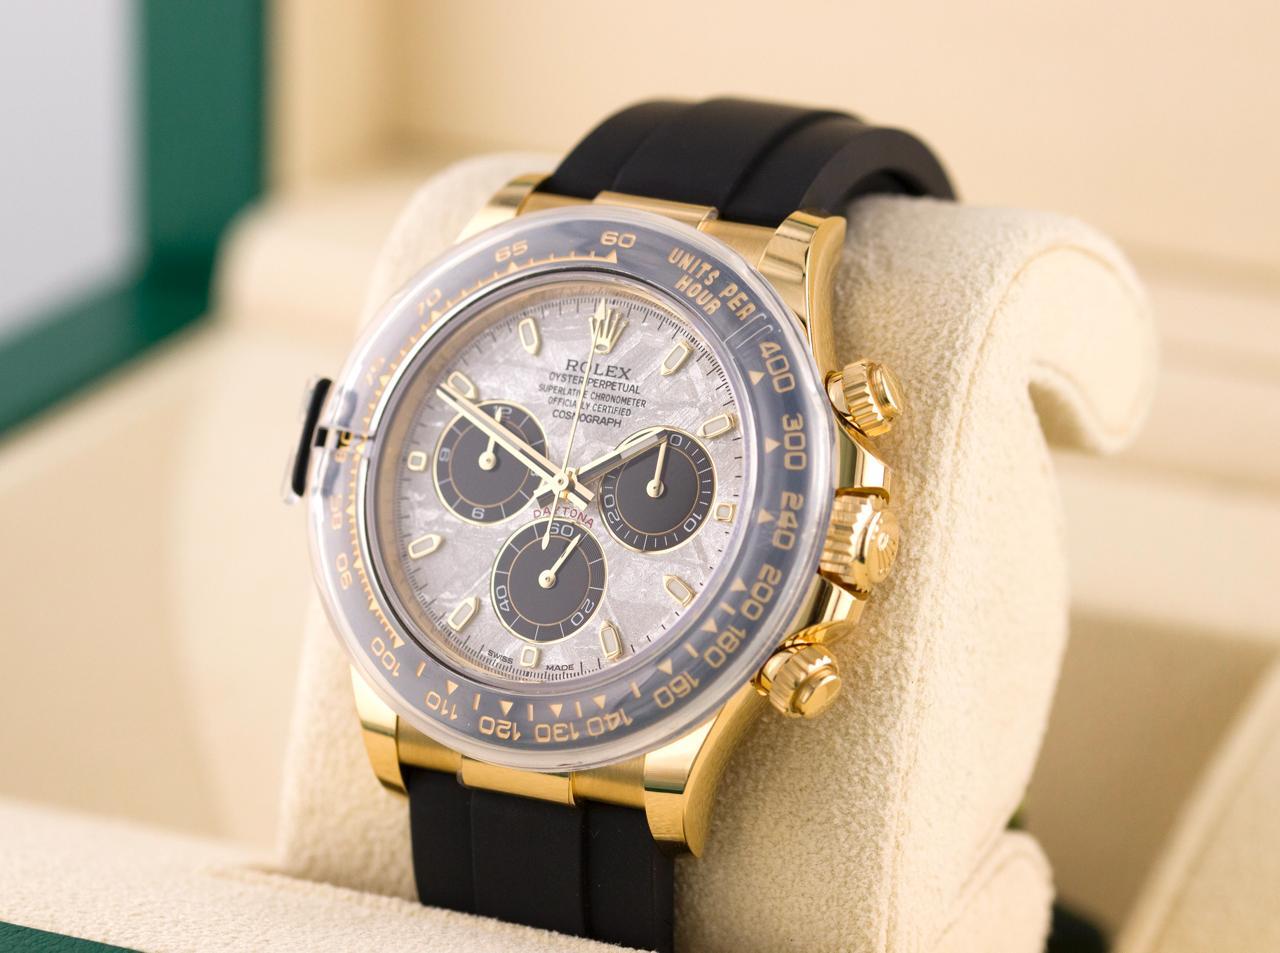 This Oyster Perpetual Cosmograph Daytona in 18k yellow gold with a Meteorite dial and an Oysterflex bracelet, features a black Cerachrom bezel with a tachymetric scale. The 18 ct gold versions of the Cosmograph Daytona with a Cerachrom bezel are